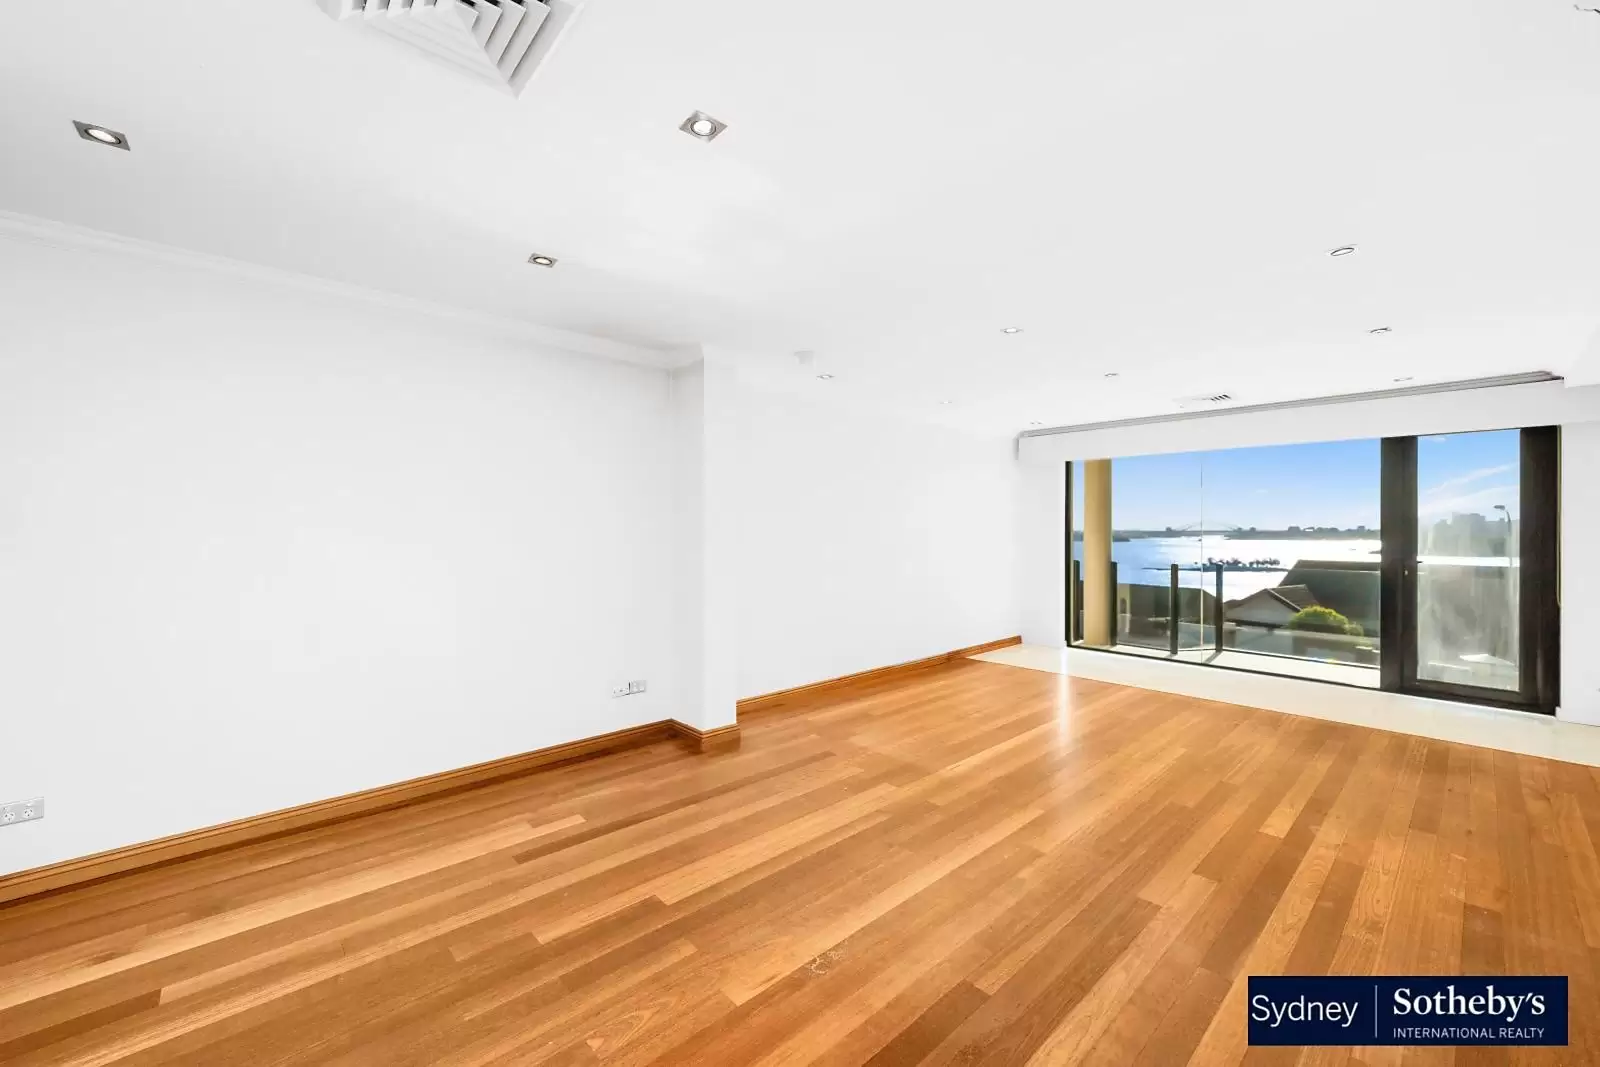 31a New South Head Road, Vaucluse Leased by Sydney Sotheby's International Realty - image 4